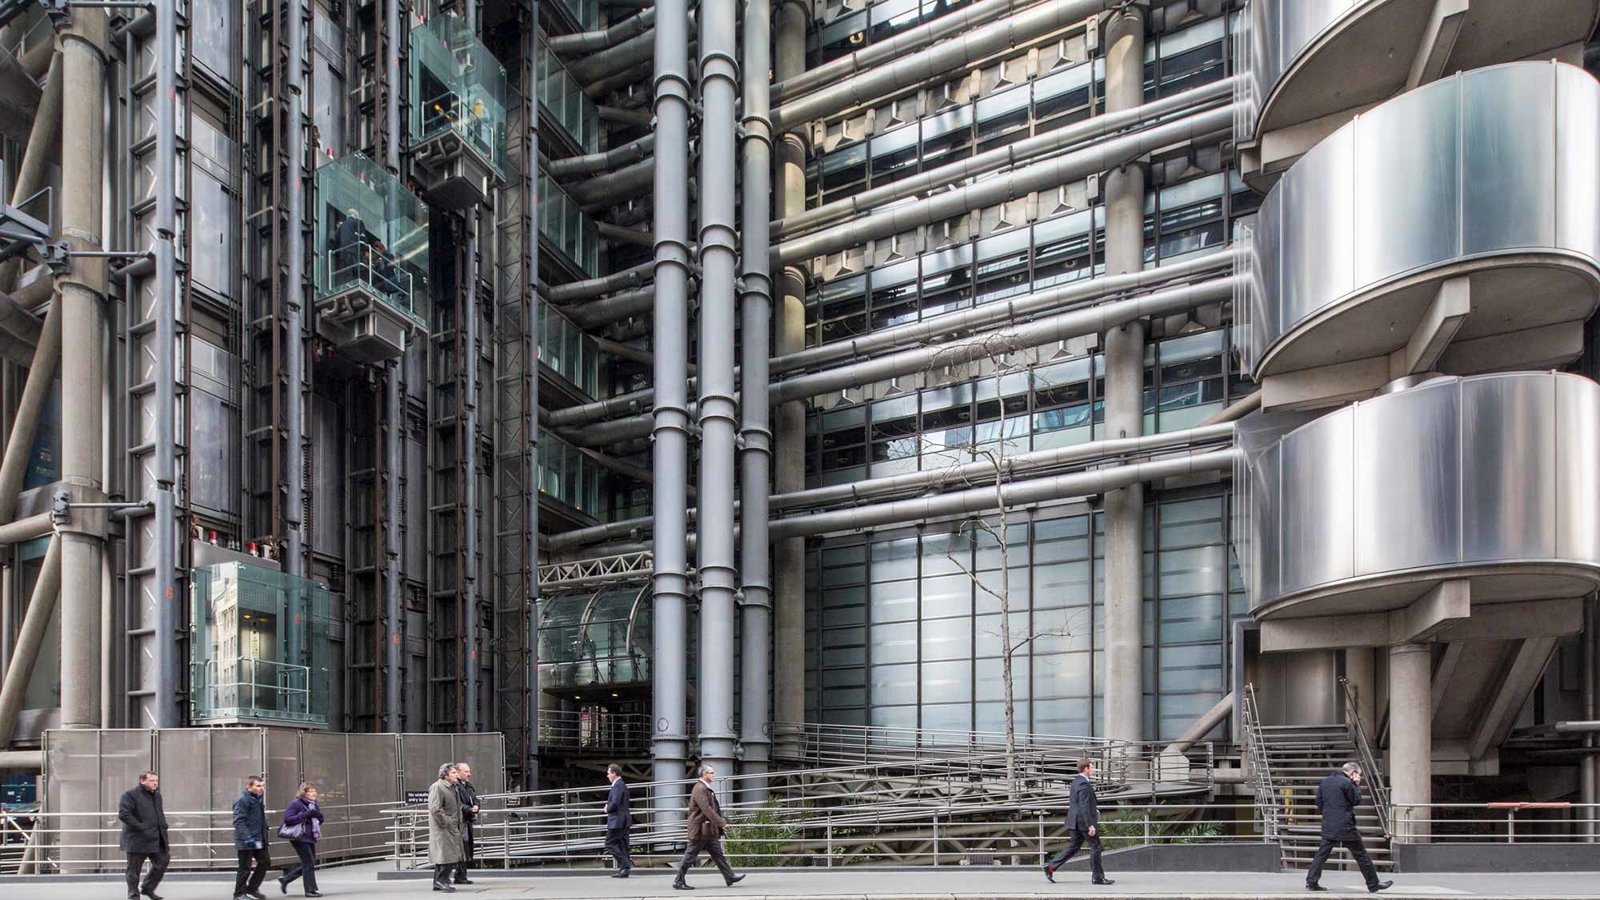 External view of the Lloyds of London building